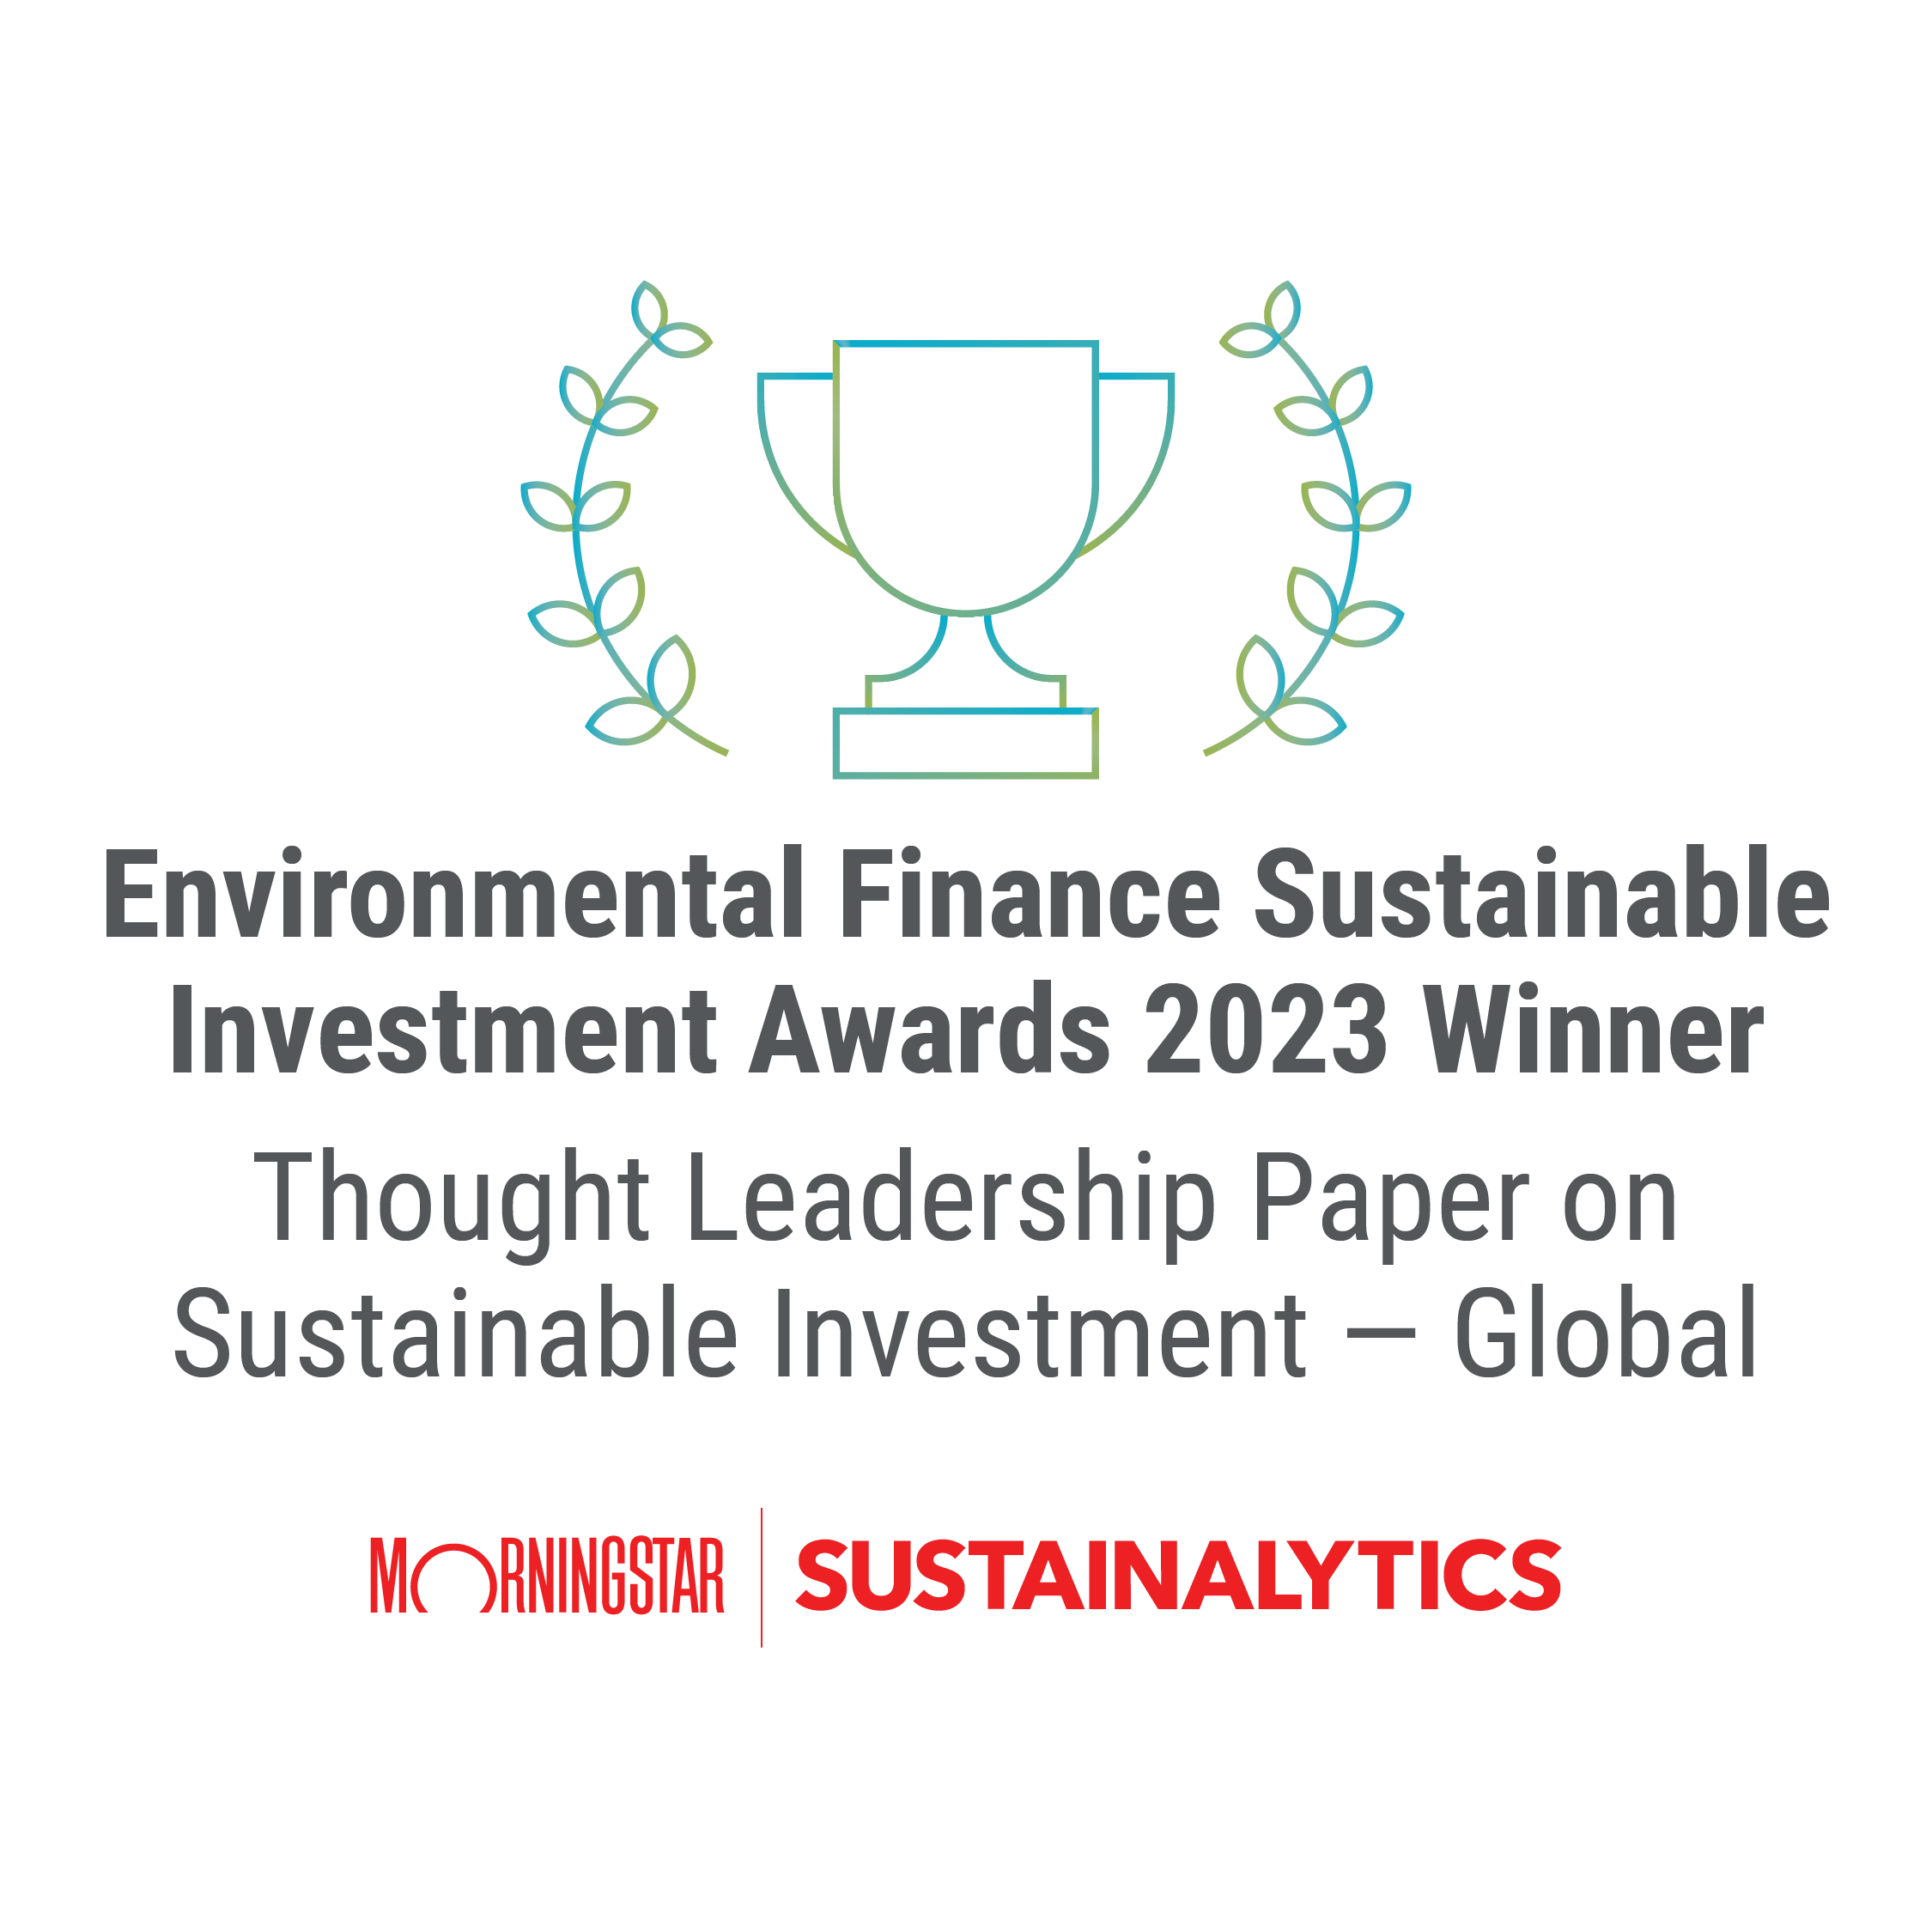 Thought Leadership Paper on Sustainable Investing - Global, Environmental Finance Sustainable Investment Awards 2023